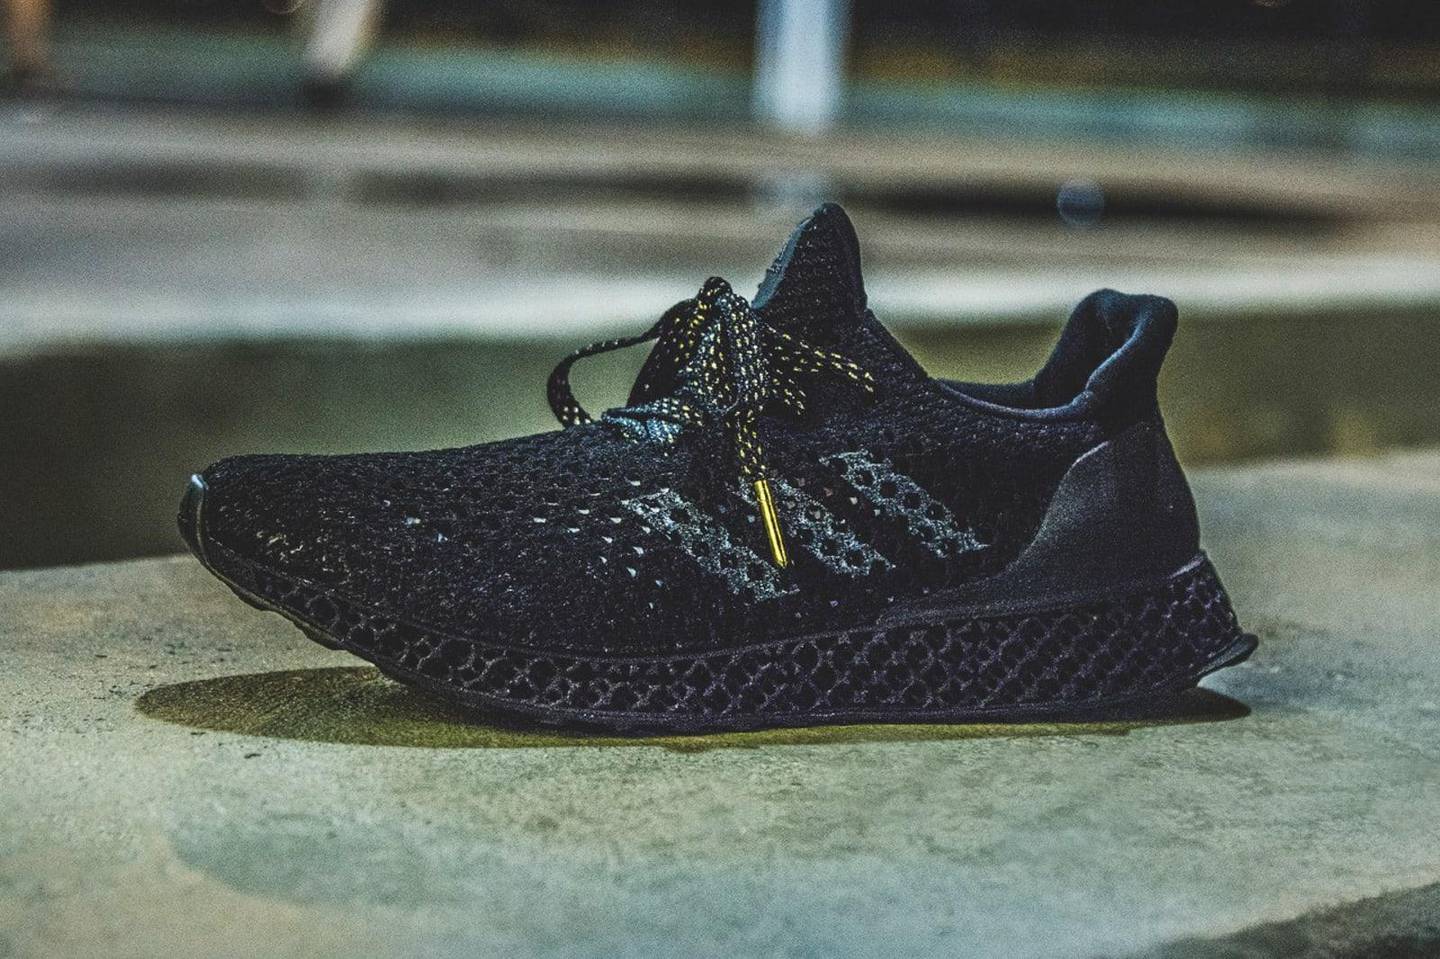 The Adidas FutureCraft 4D sneaker, with 3D printed mid sole. Courtesy Adidas